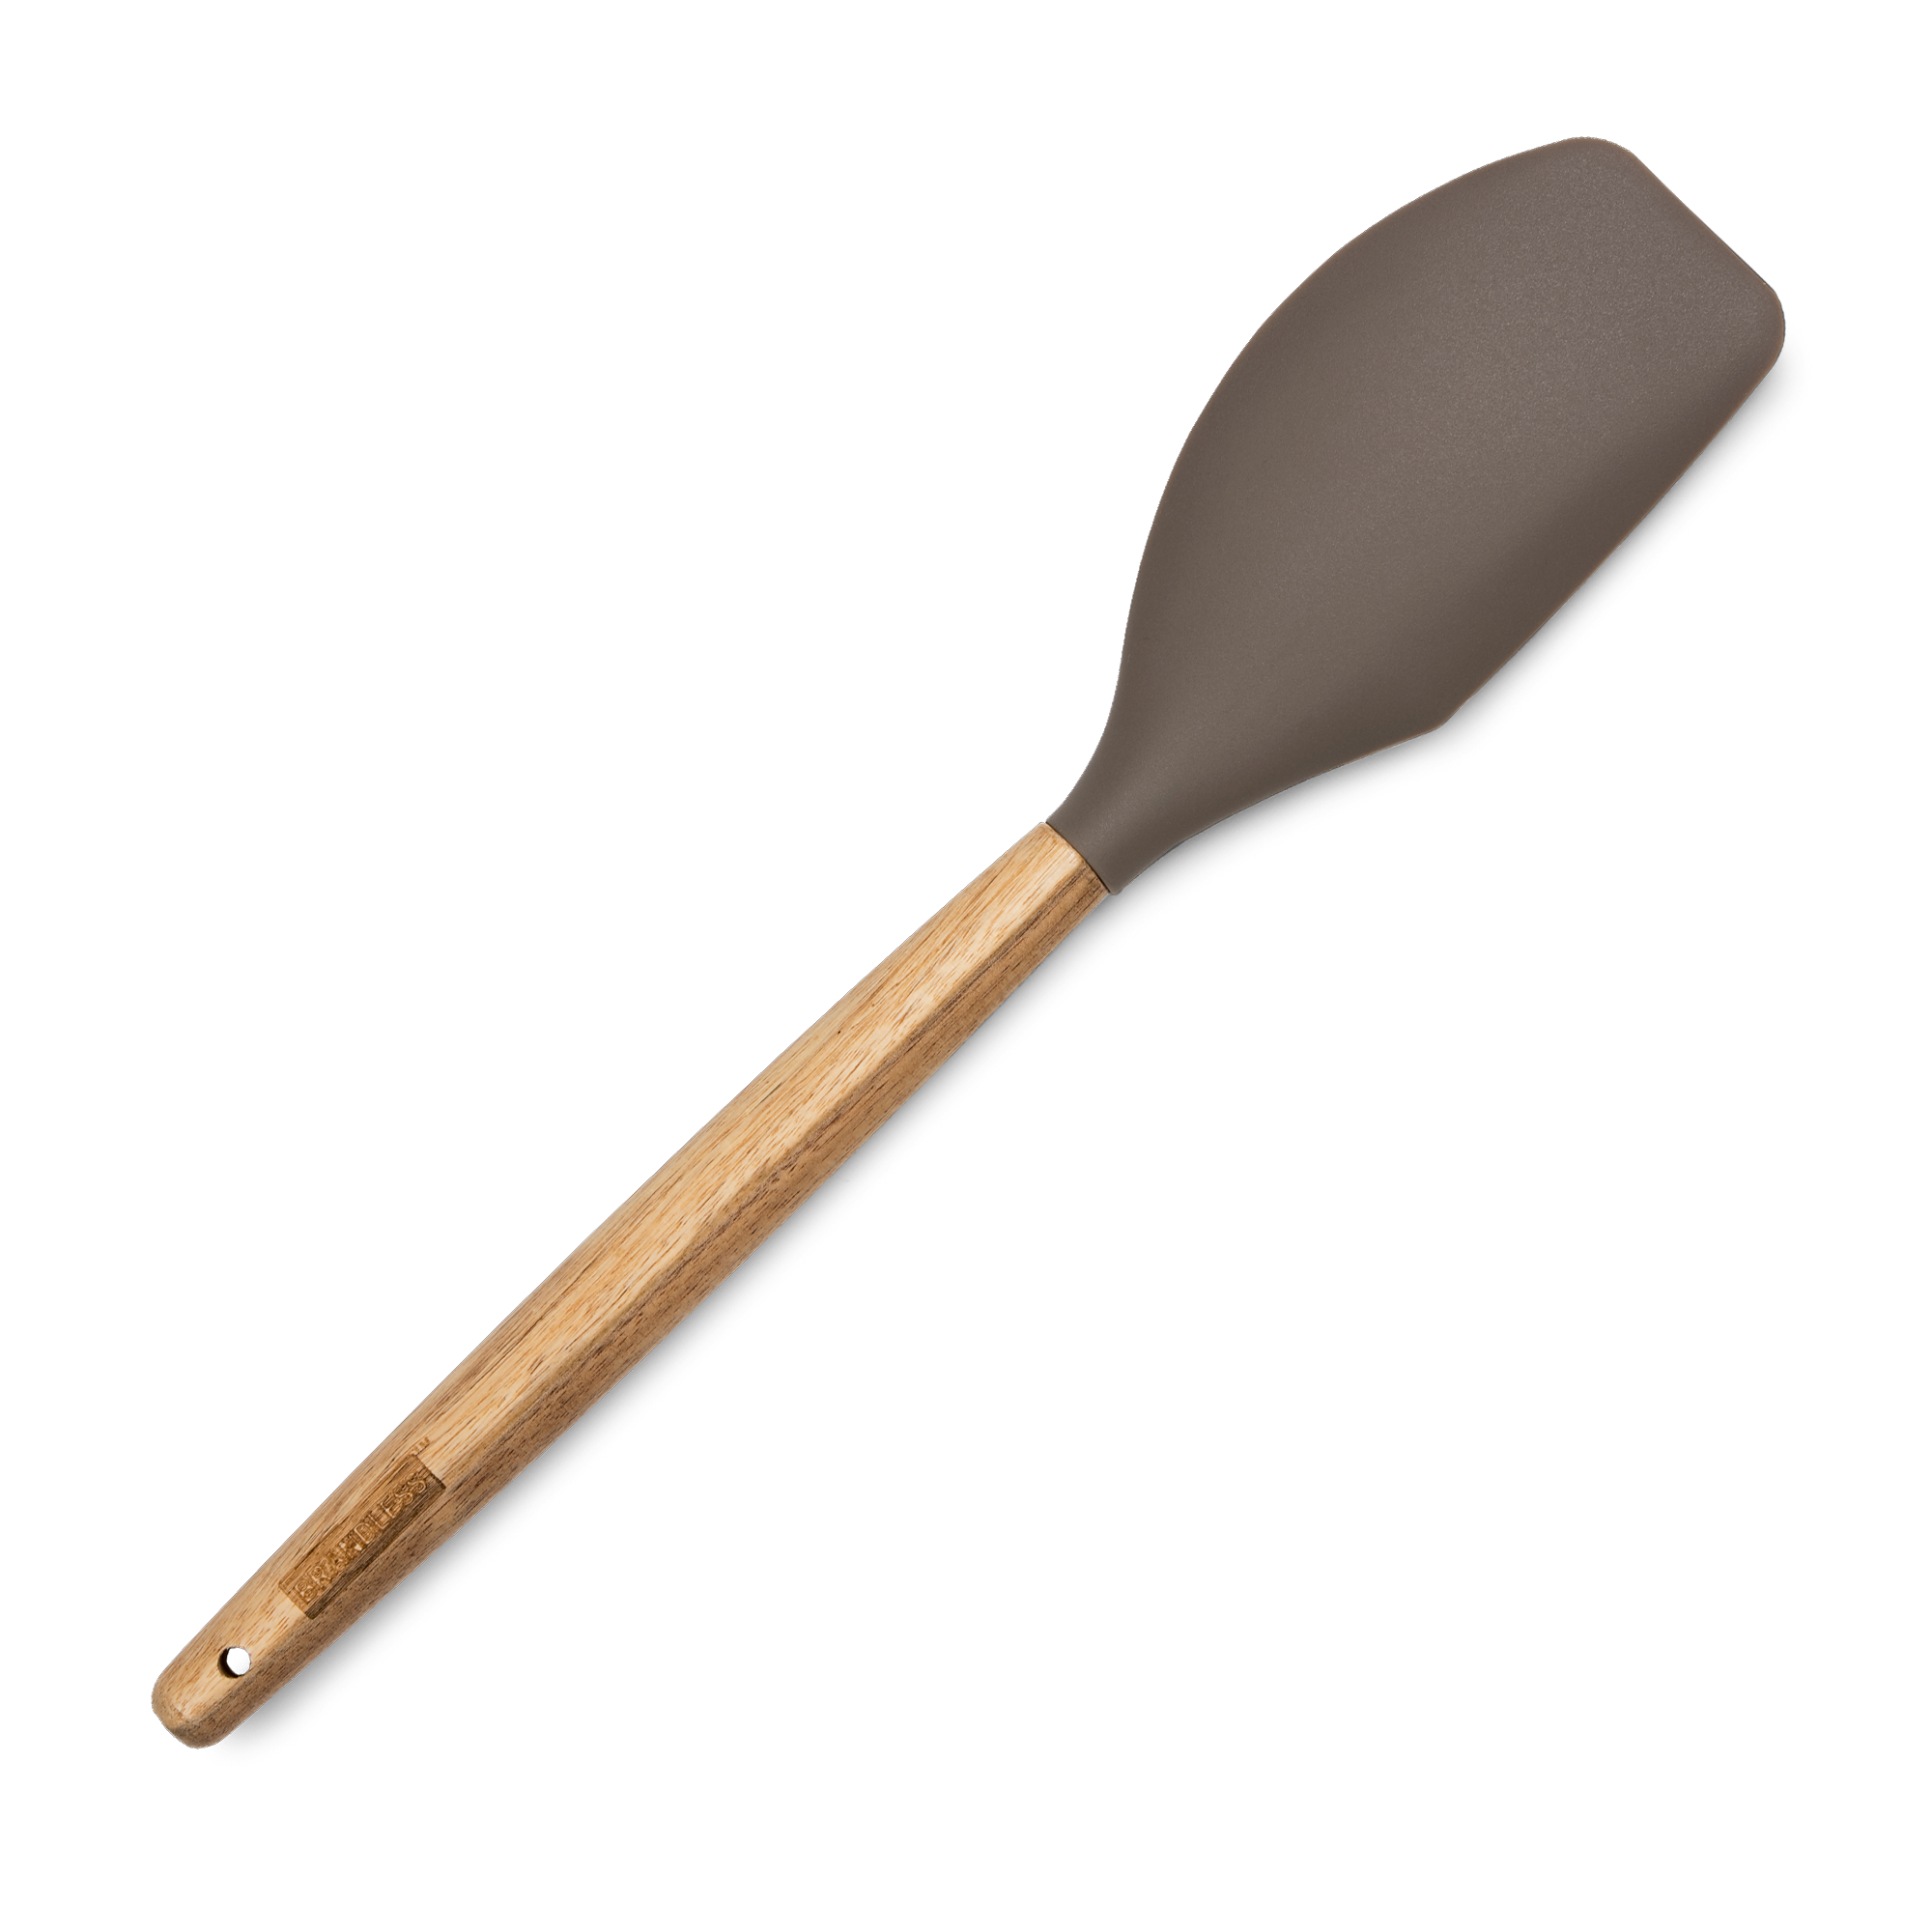 Product photo, silicone spatula, side view